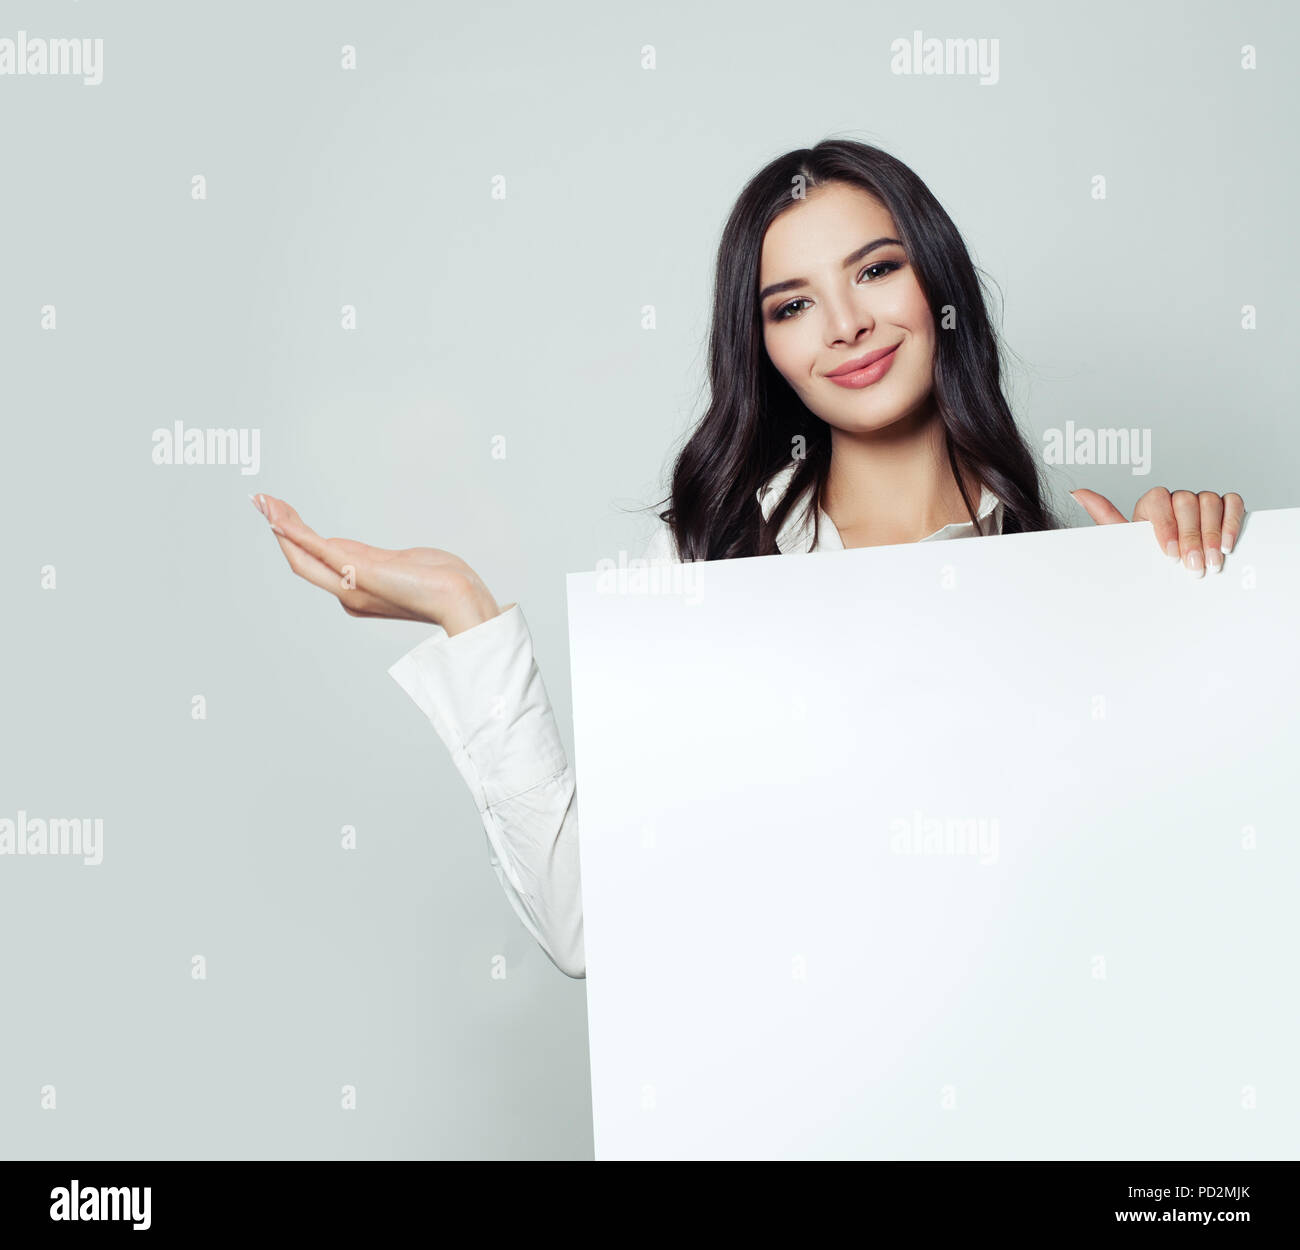 Happy business woman showing empty open hand and holding white blank paper banner background. Young woman smiling, business and education concept Stock Photo